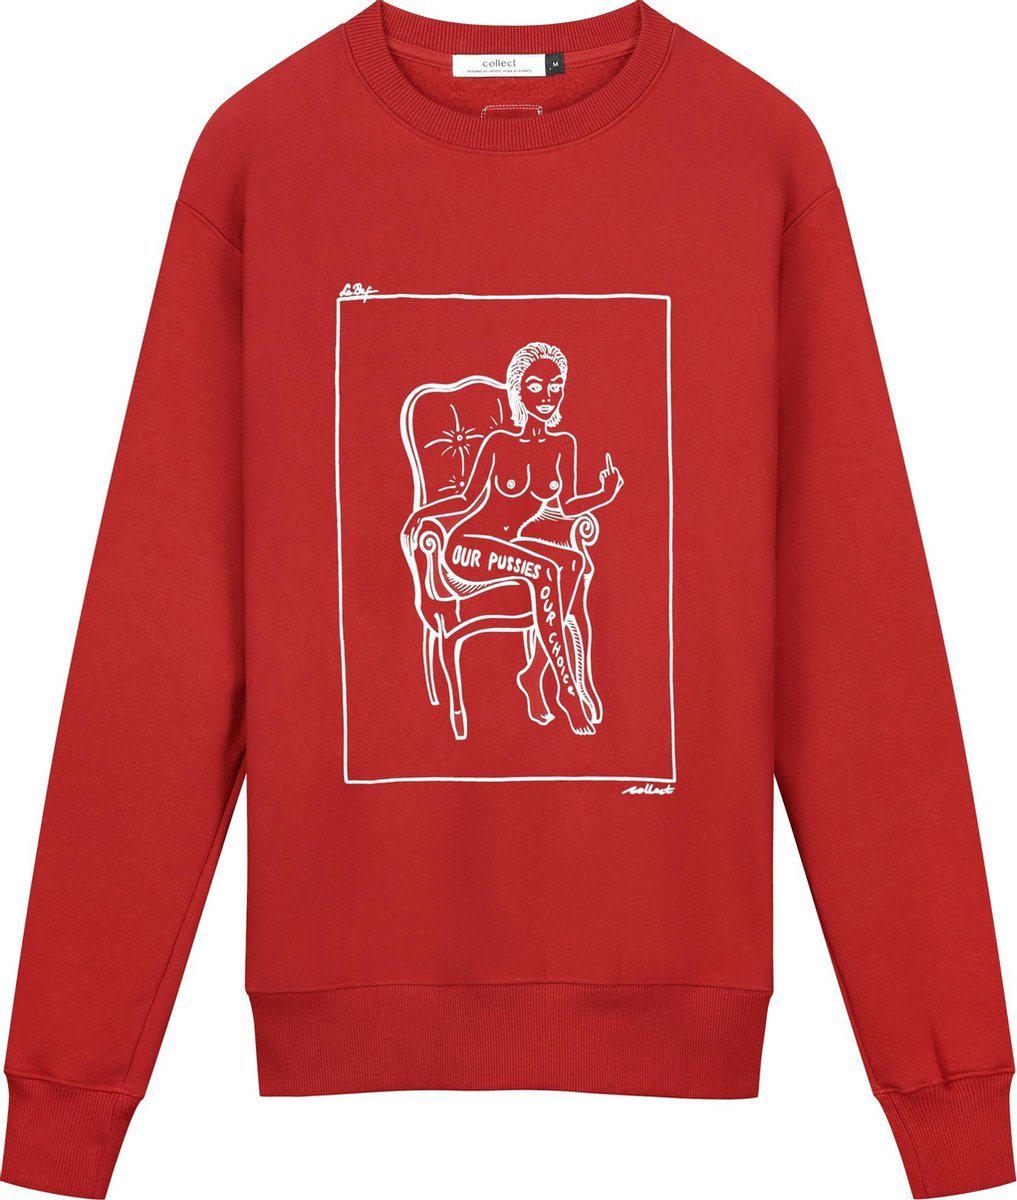 Collect The Label - Hippe Trui - Our Pussies Our Choice Sweater - Rood - Unisex - XXS